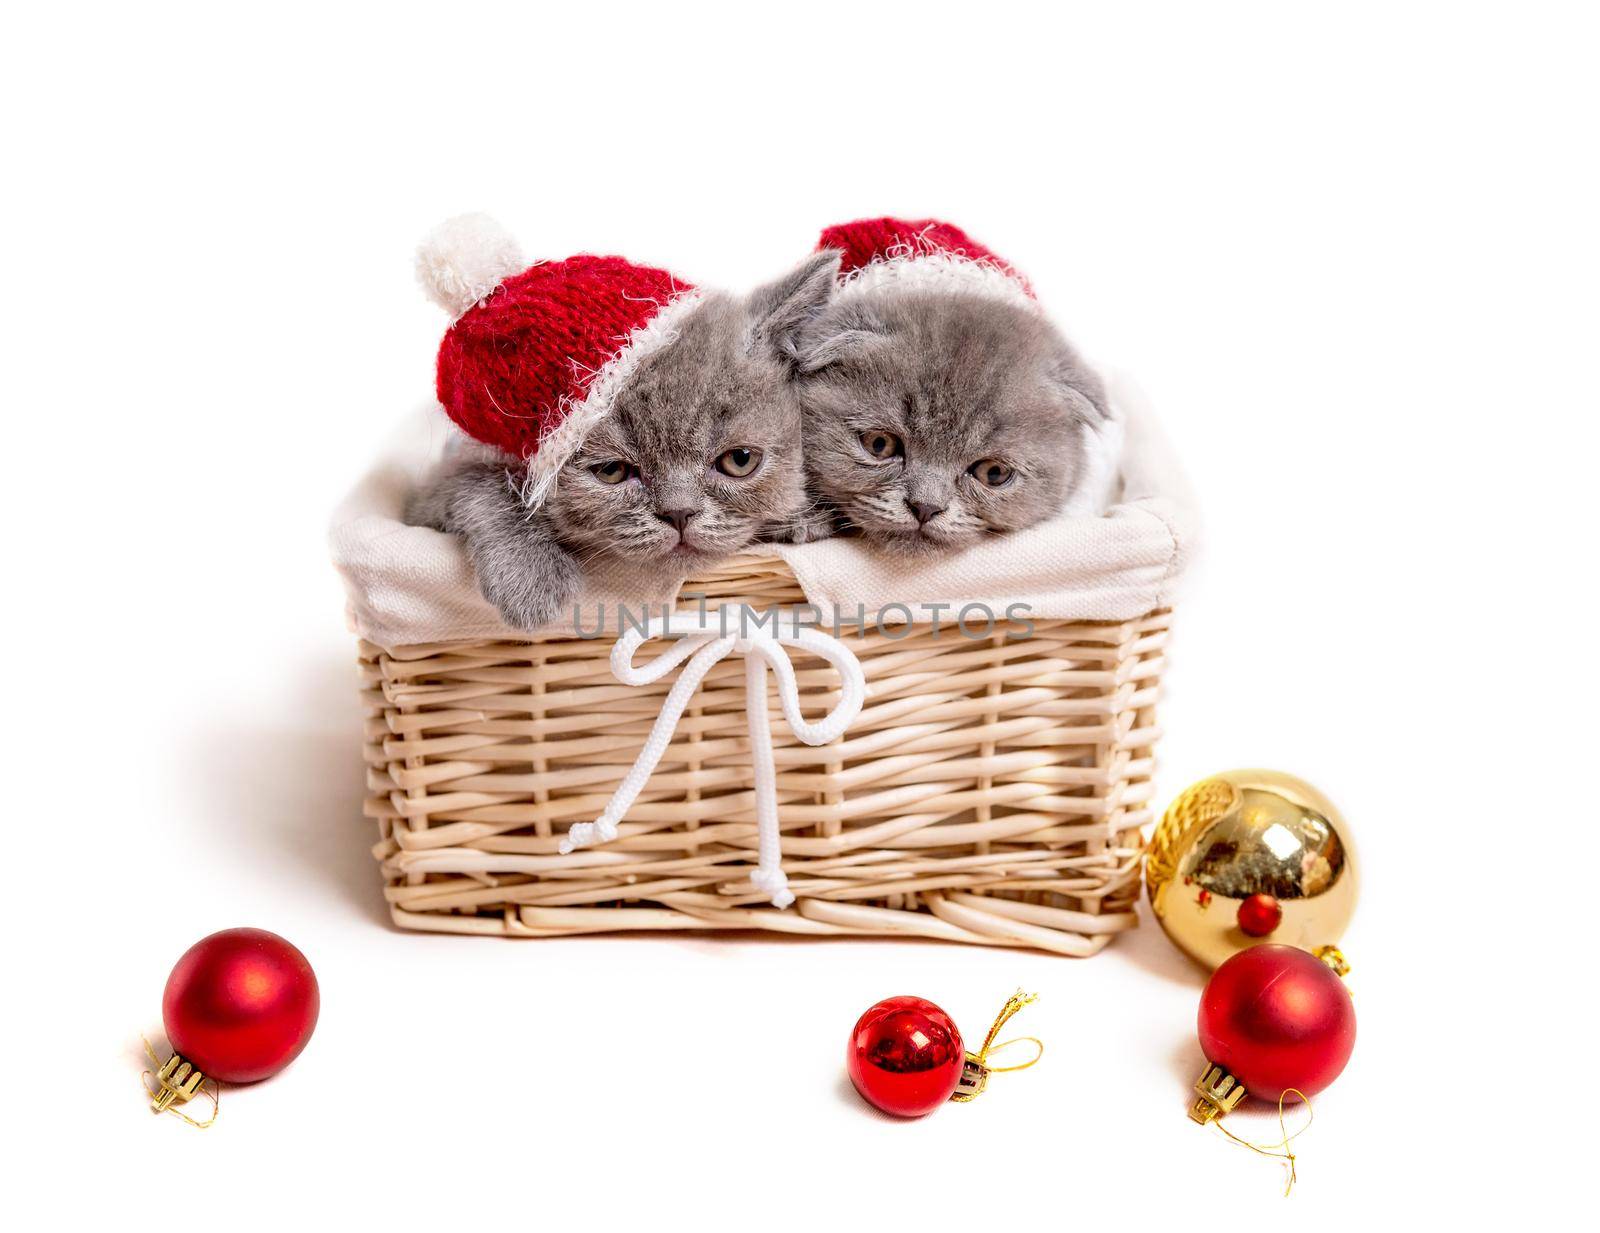 Gray scottish kittens in Santa hats lie in basket isolated on white background with Christmas decoration balls